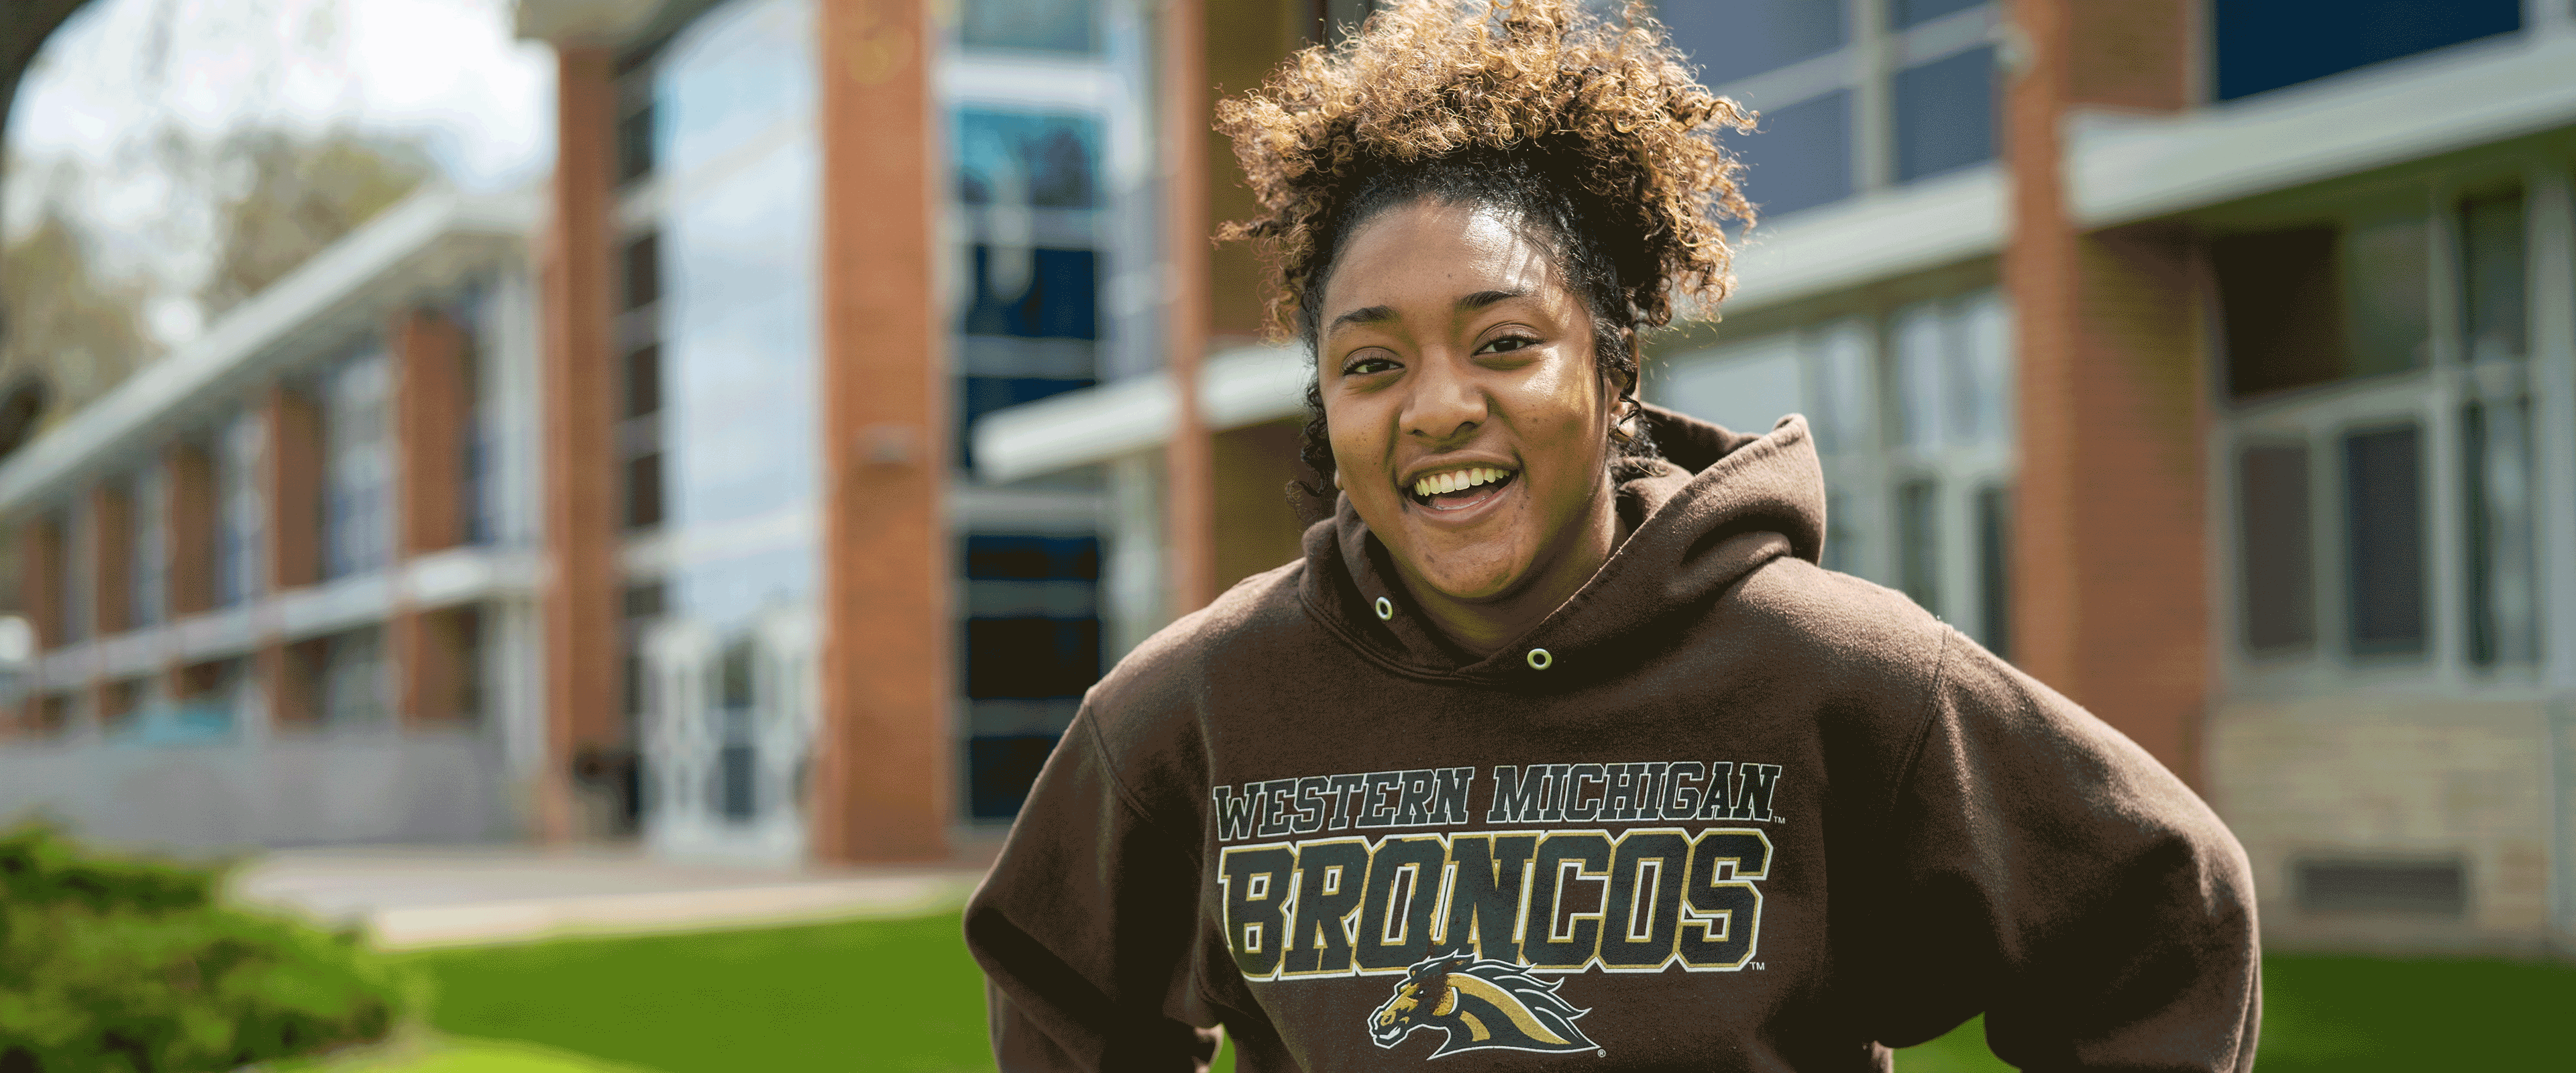 A Merze Tate College student in WMU sweatshirt smiling outdoors